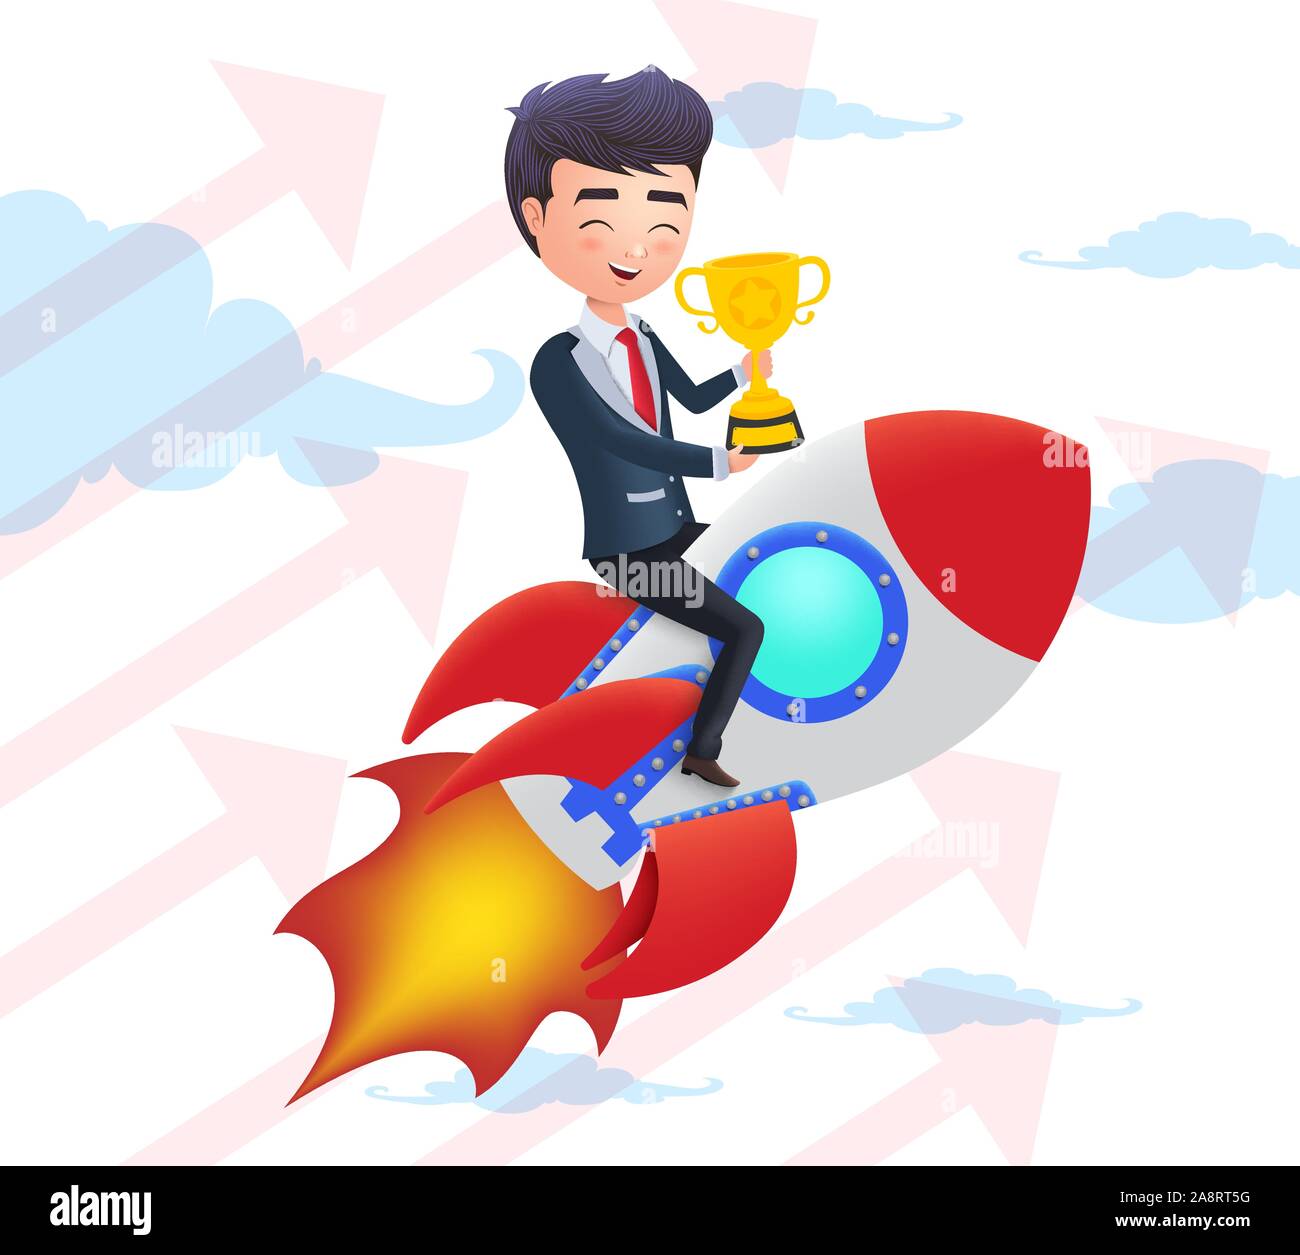 Business character achievement vector concept. Business man riding a rocket and holding golden cup trophy flying in the sky. Vector illustration. Stock Vector